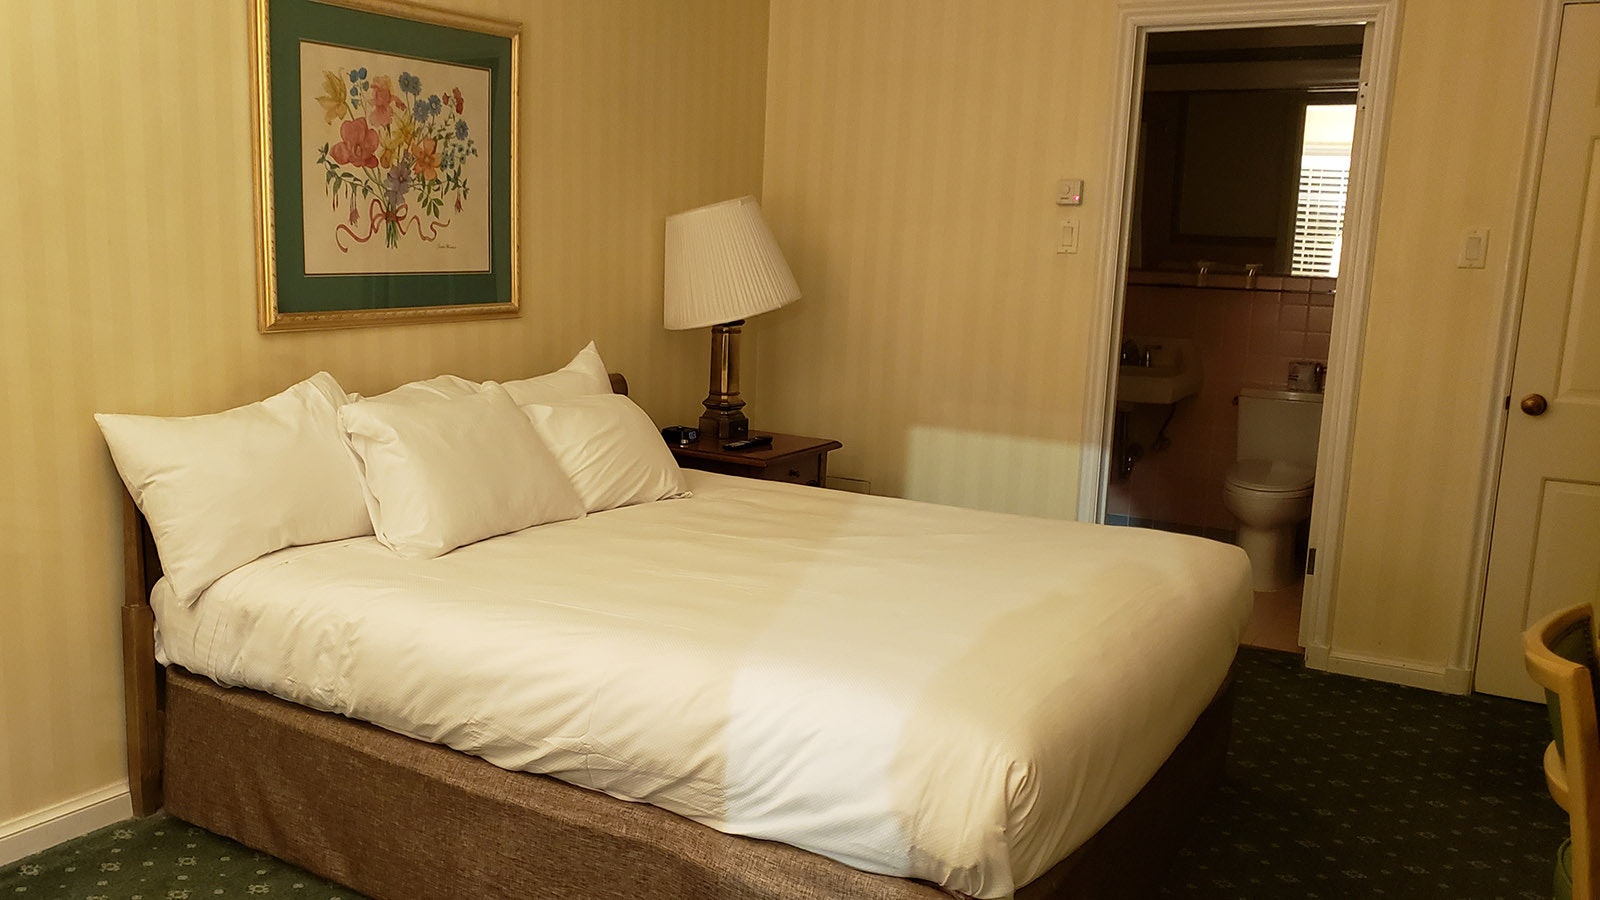 Rooms are sizable and clean with a comfortable bed for weary travelers.